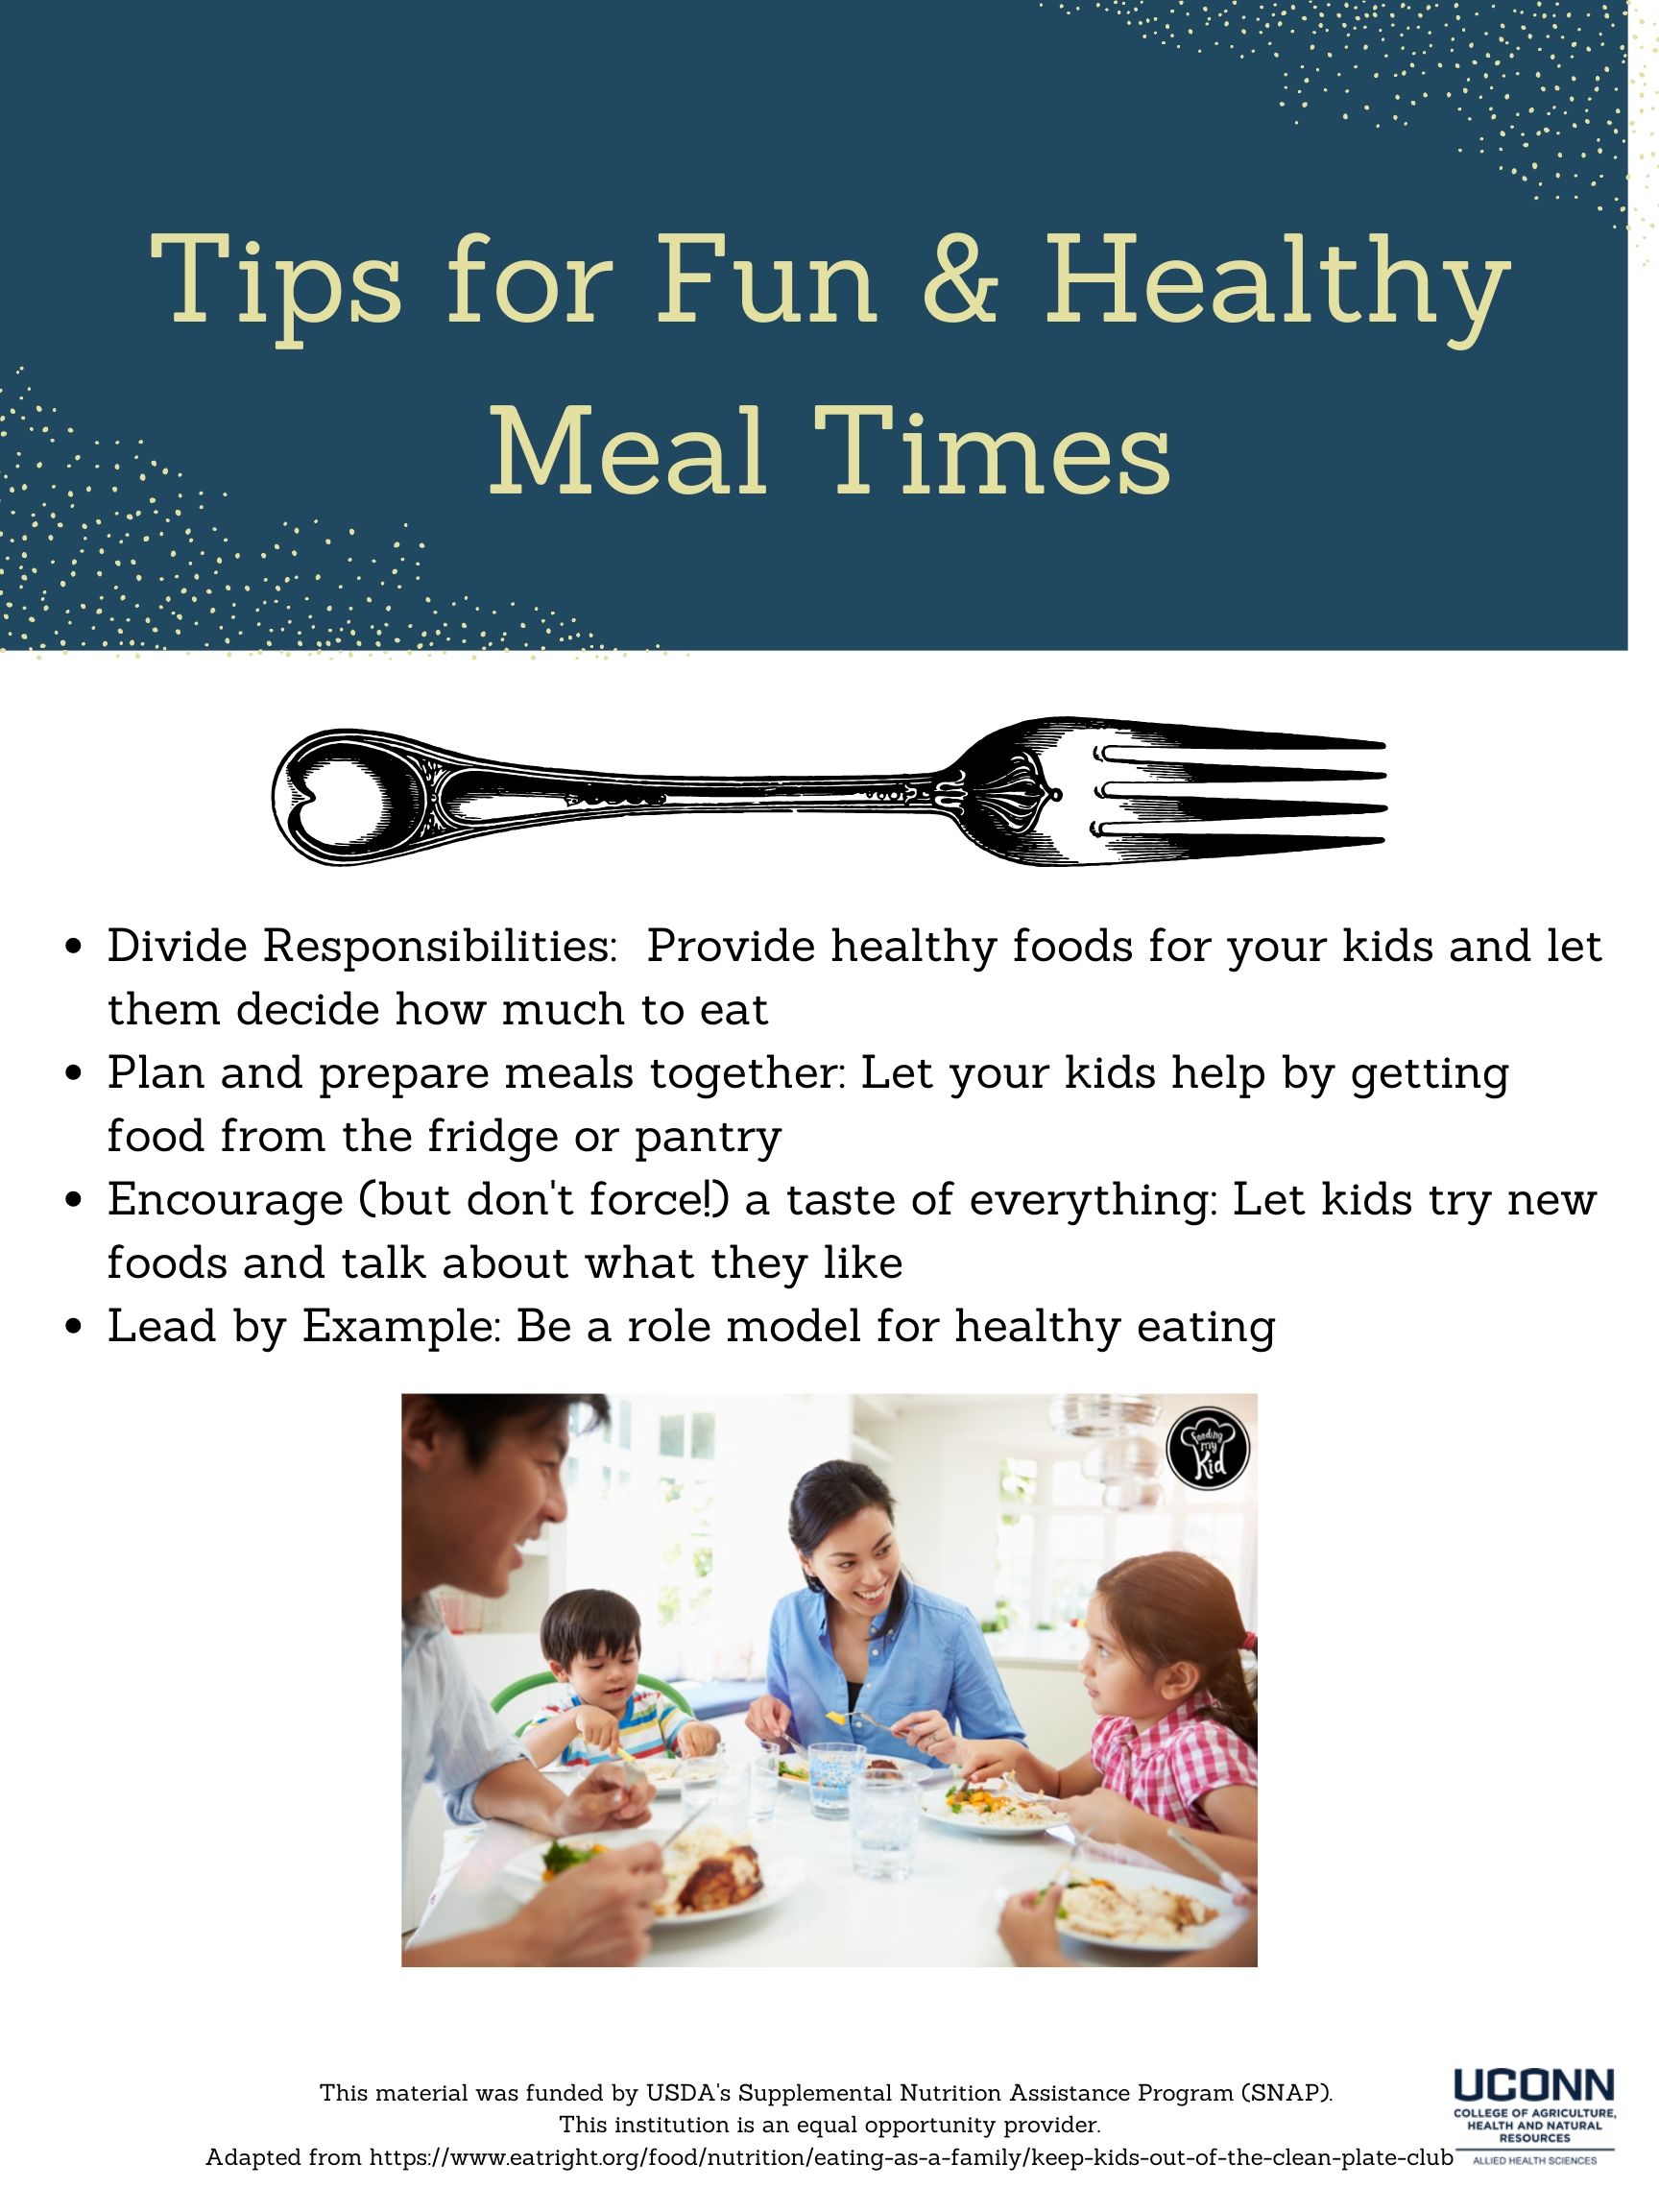 Tips for fun and healthy mealtimes